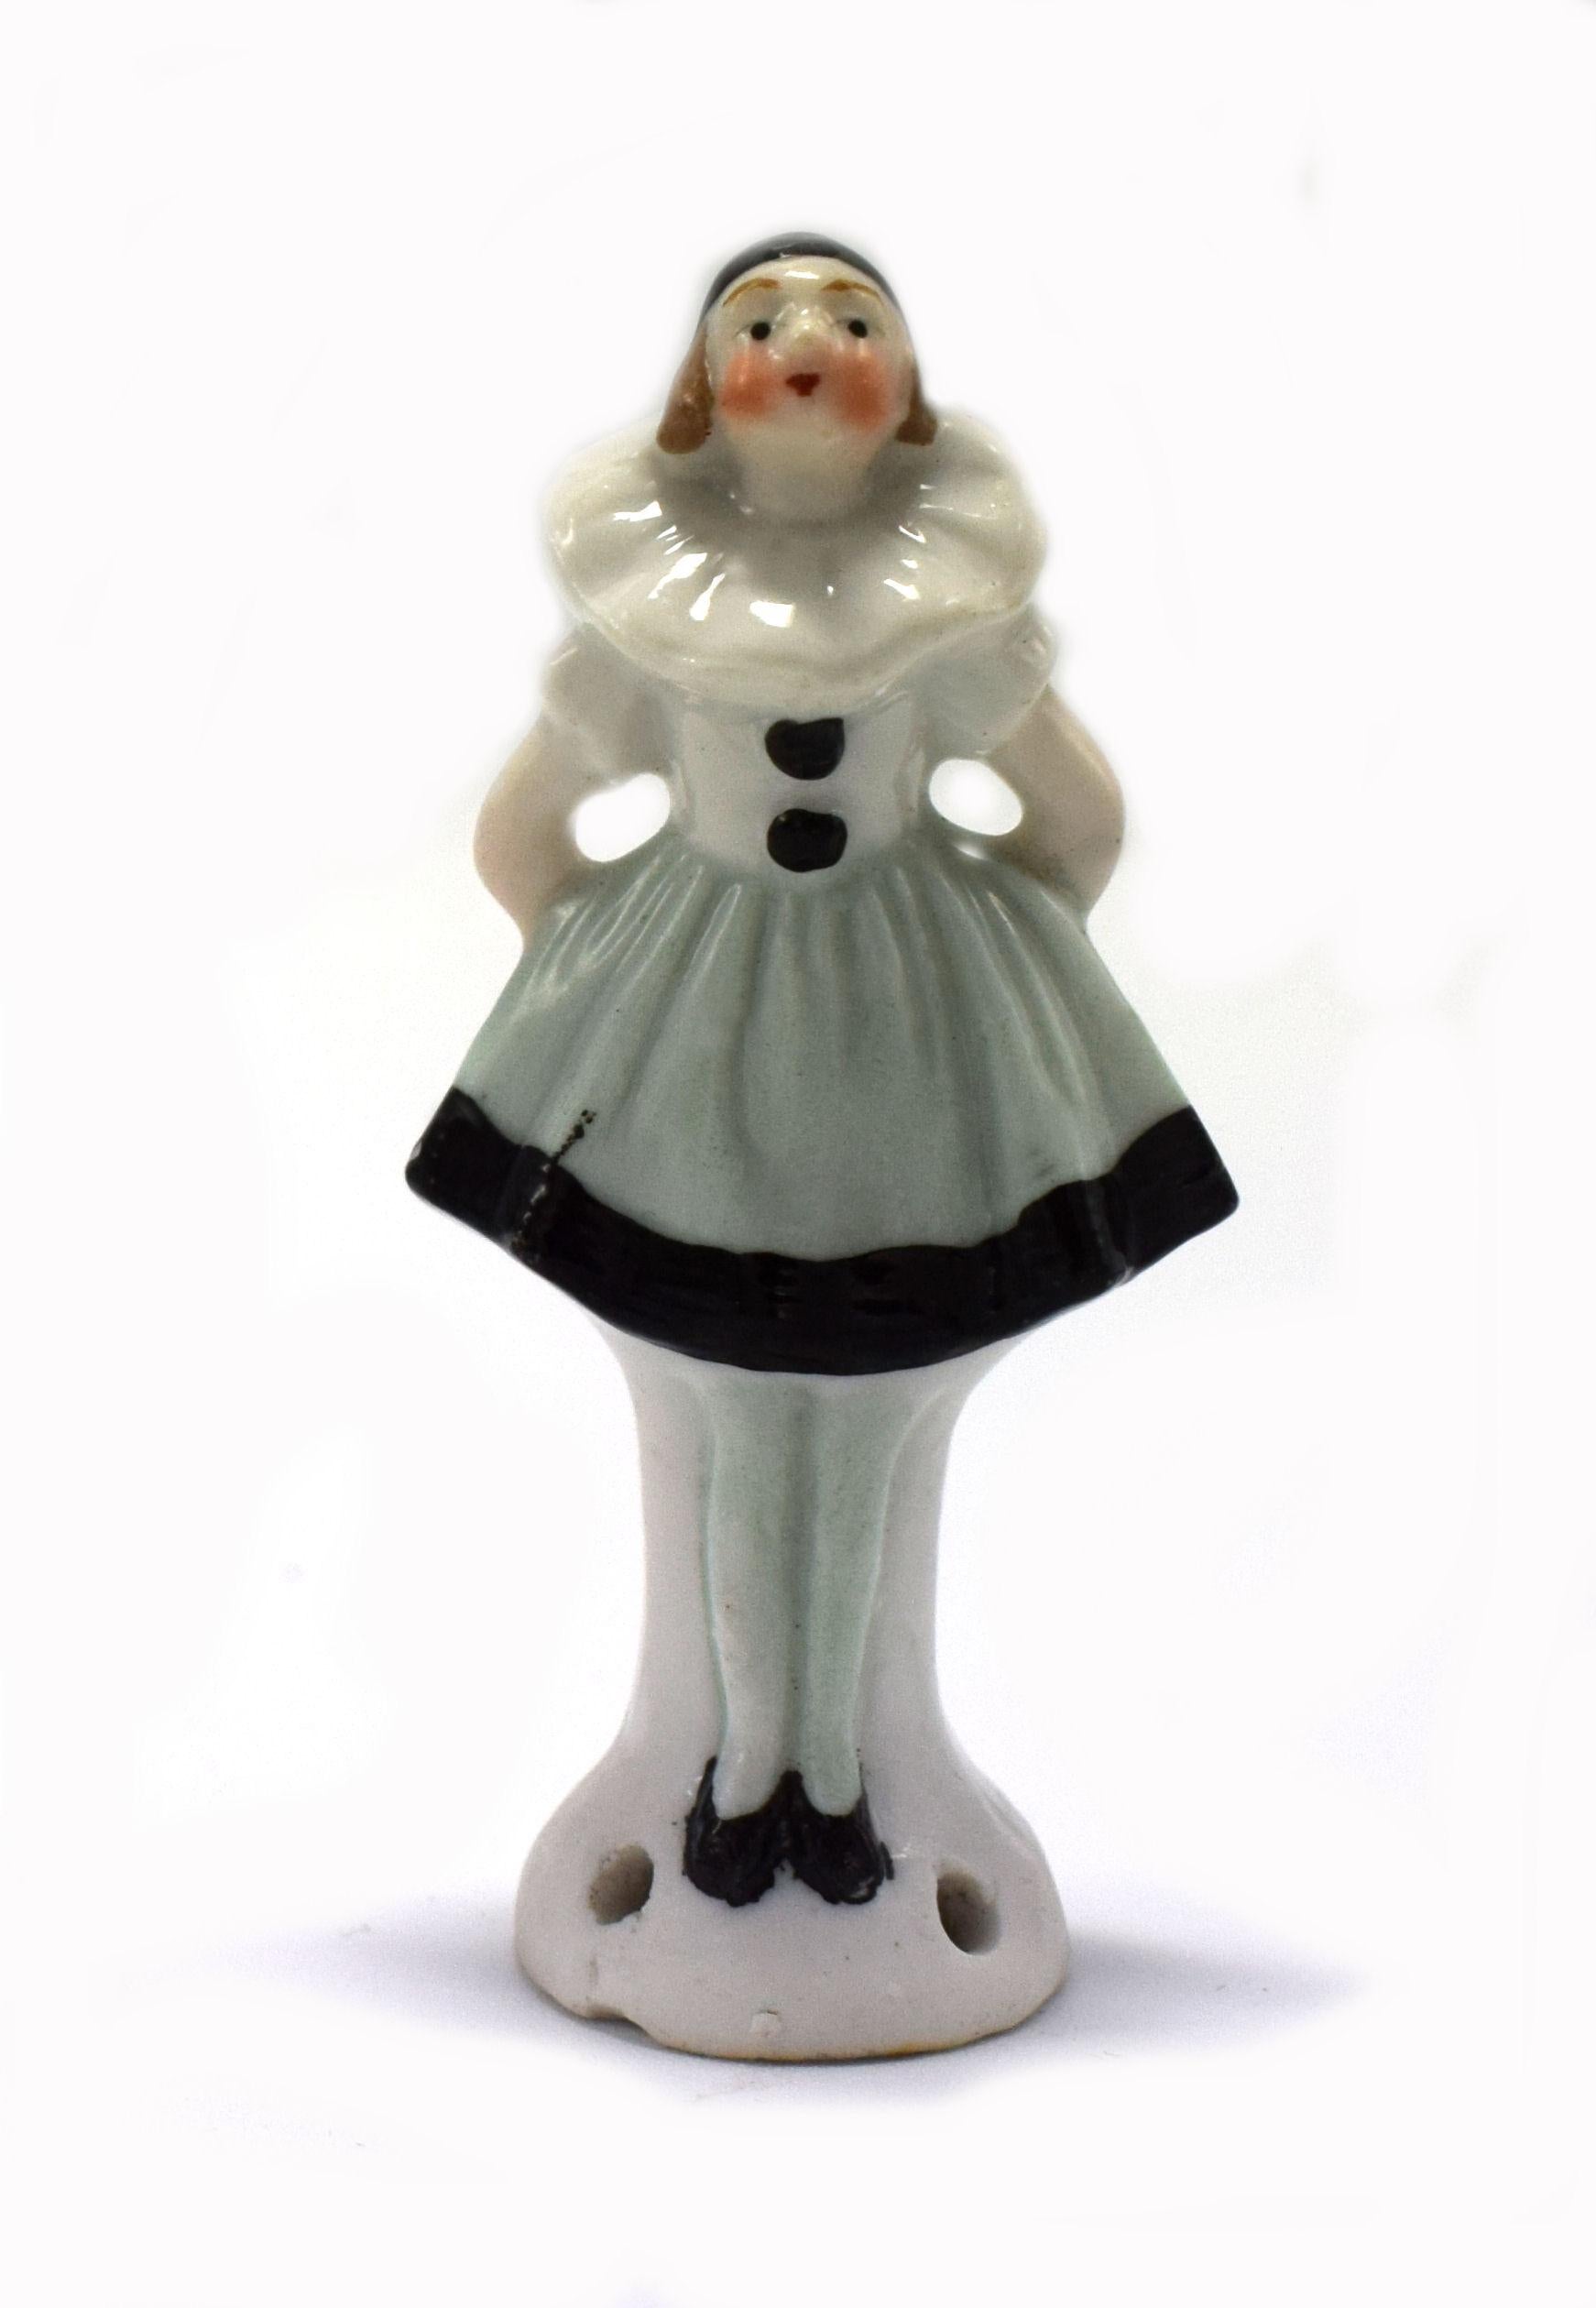 Wonderful 1930s Art Deco and totally charming full figured pin cushion half doll which was manufactured by the German factory of Carl Schneider, she stands a petite 6.7 cm in height. This wonderful little half doll is in the form of a standing girl